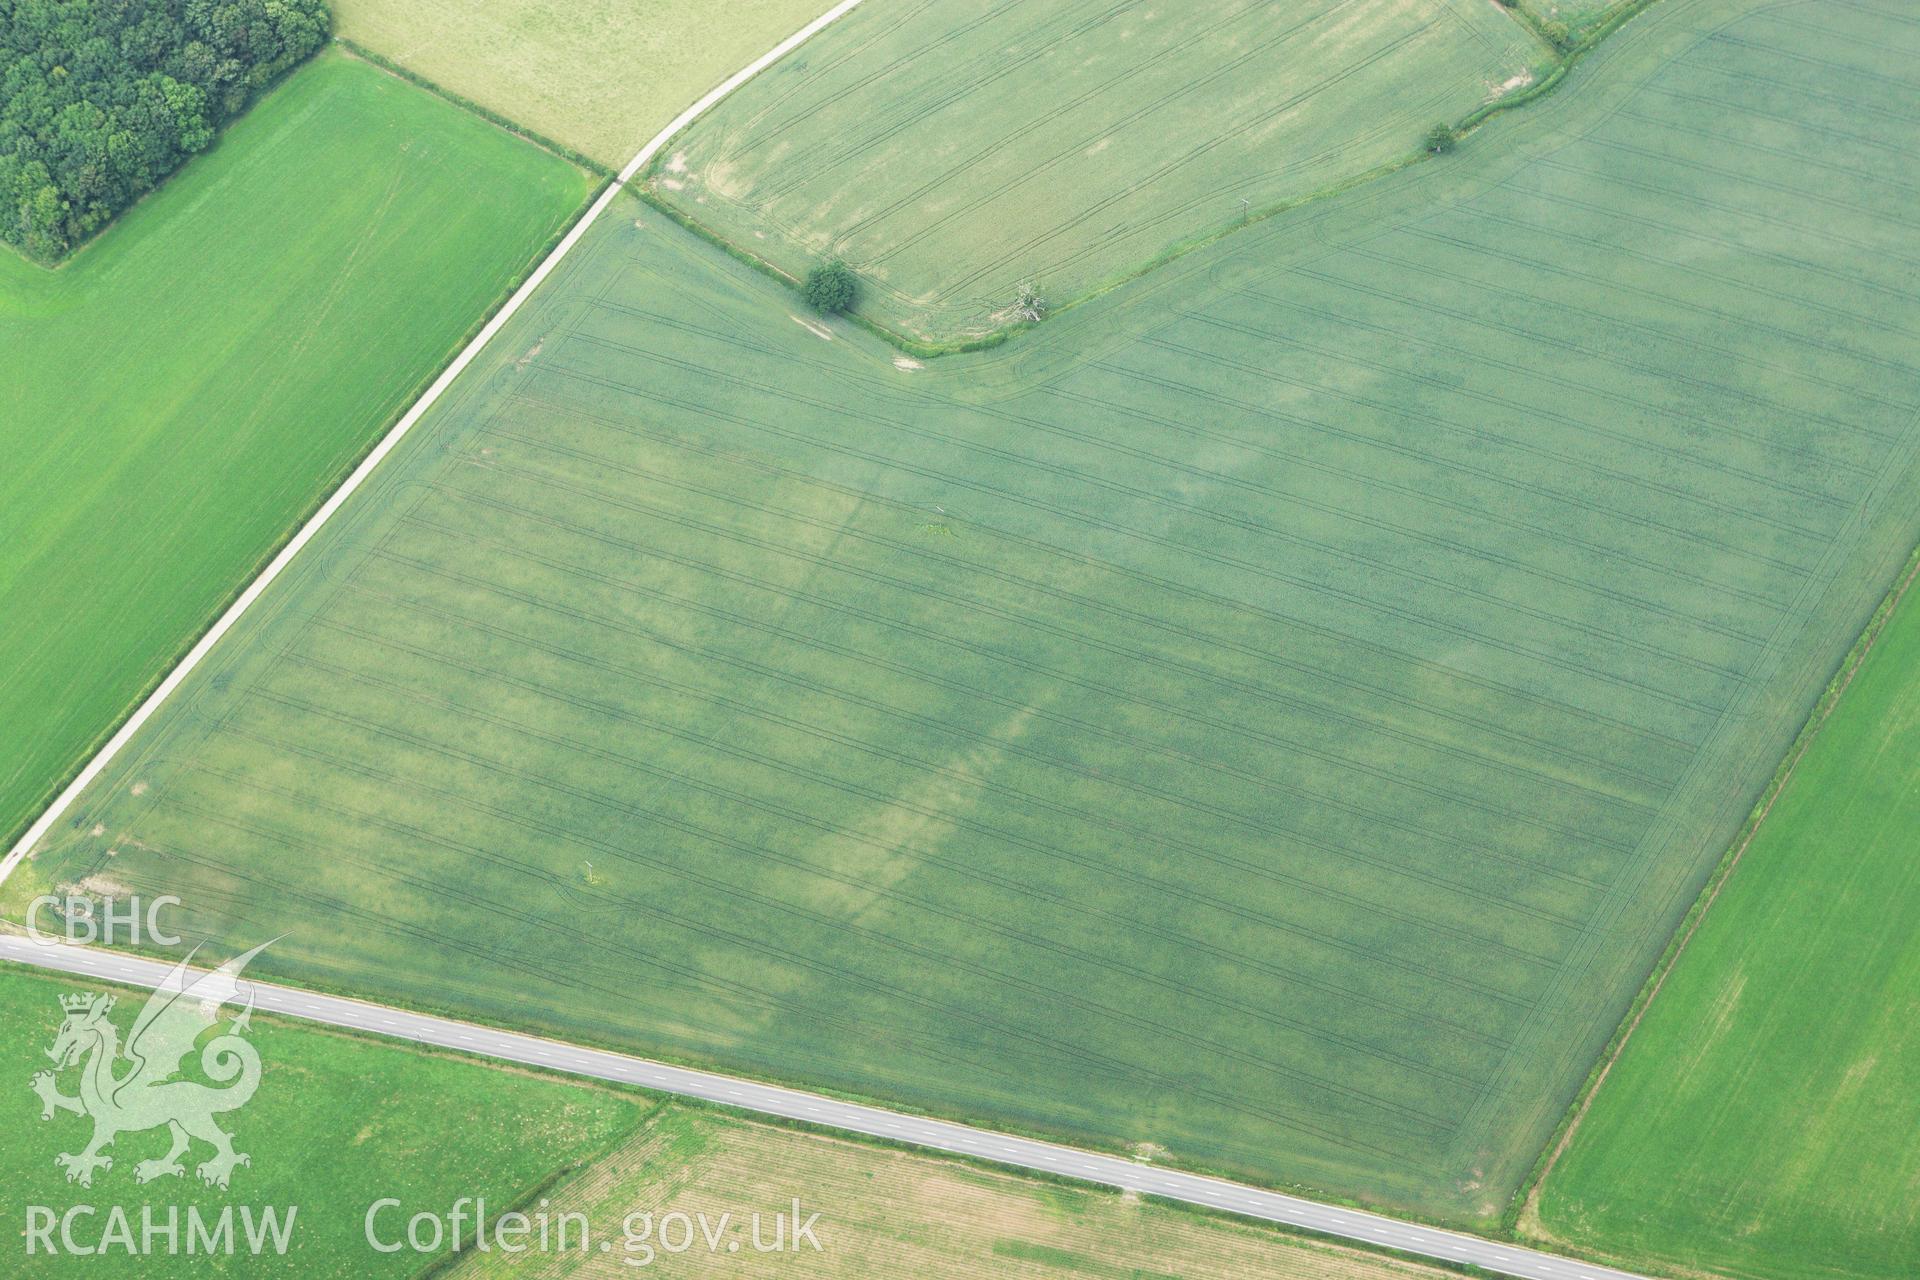 RCAHMW colour oblique aerial photograph of Gerwyn-Fechan Cropmarks showing a ring ditch. Taken on 29 June 2009 by Toby Driver